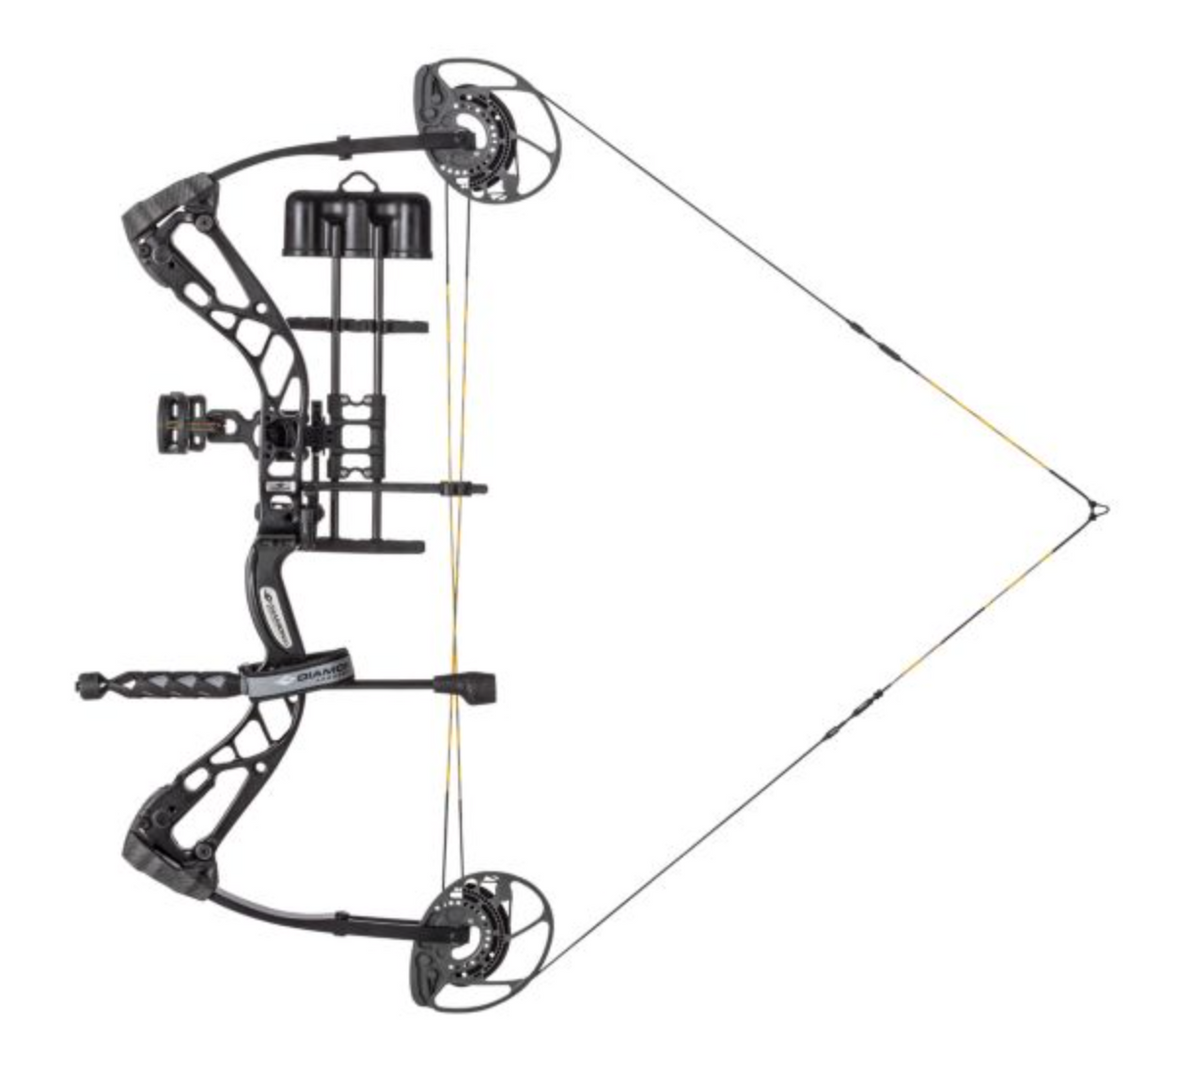 Diamond® by Bowtech® Edge 320 R.A.K. Compound-Bow Package – Wild